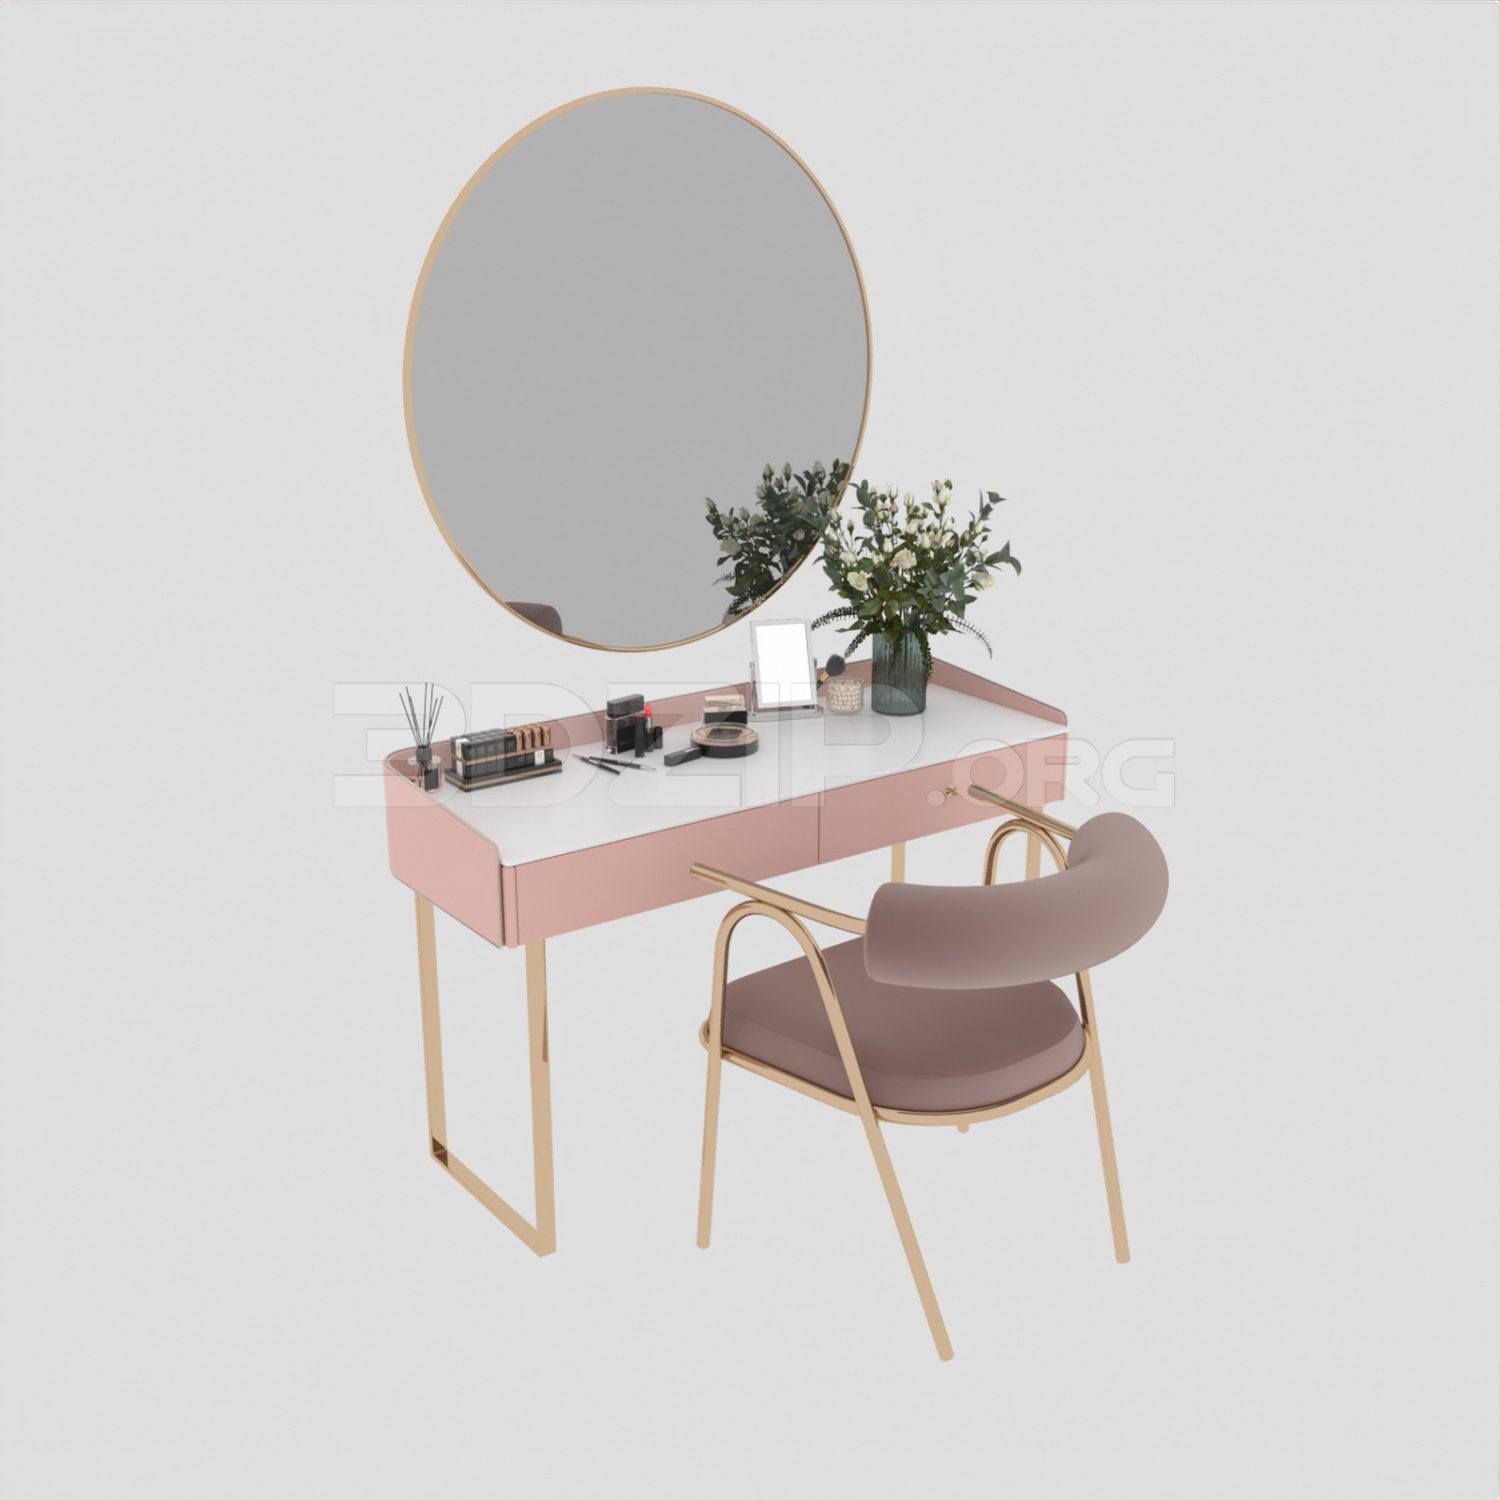 10606. Download Free Dressing Table Model By Trang Chuot